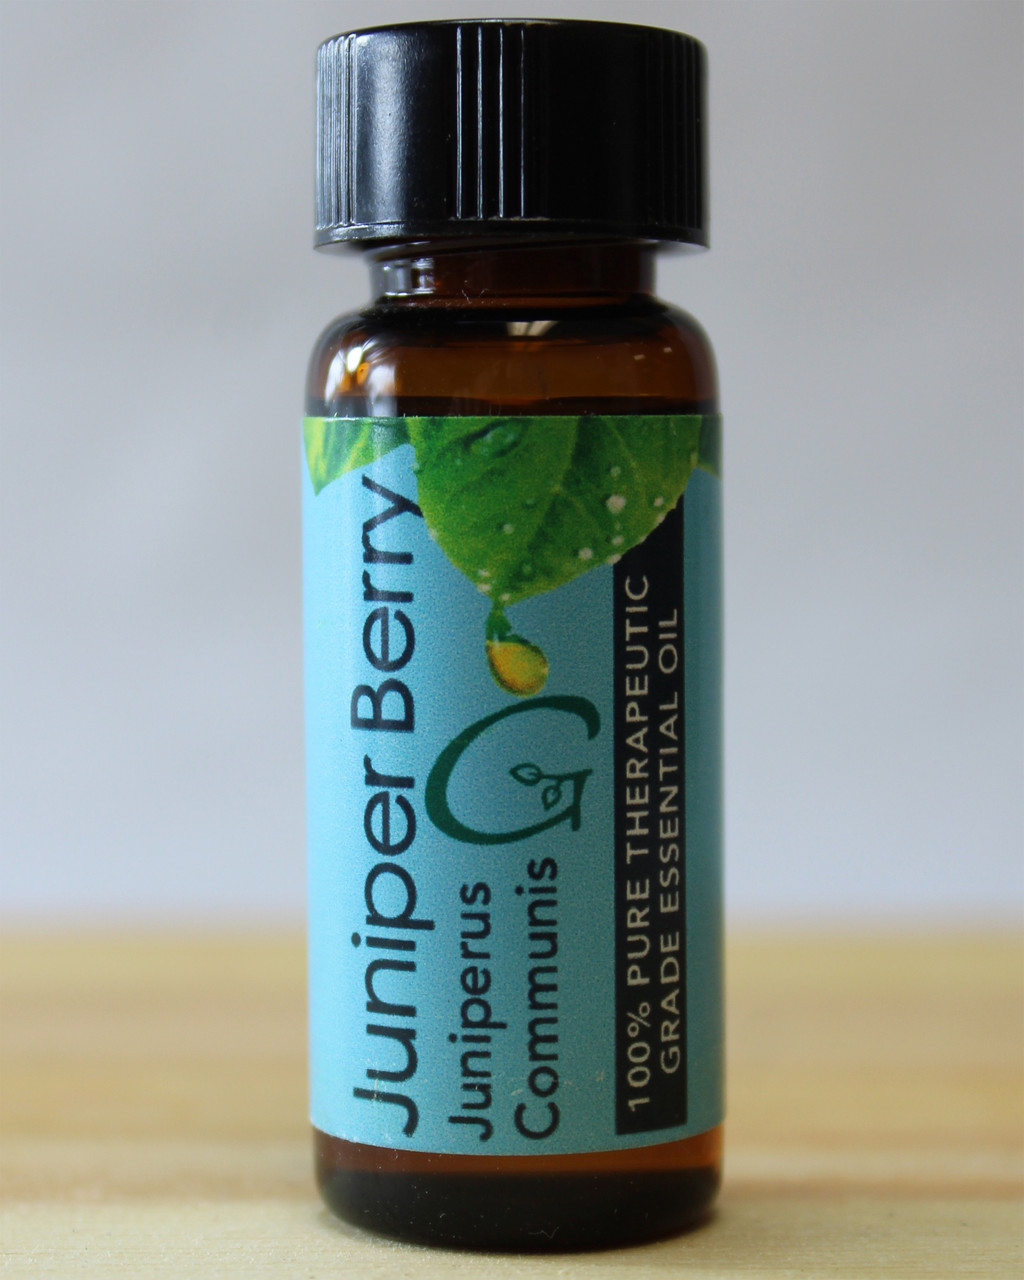 Juniper Berry Pure Plant Essential Oil Uses and Benefits by Grampa's Garden Made in Maine USA
